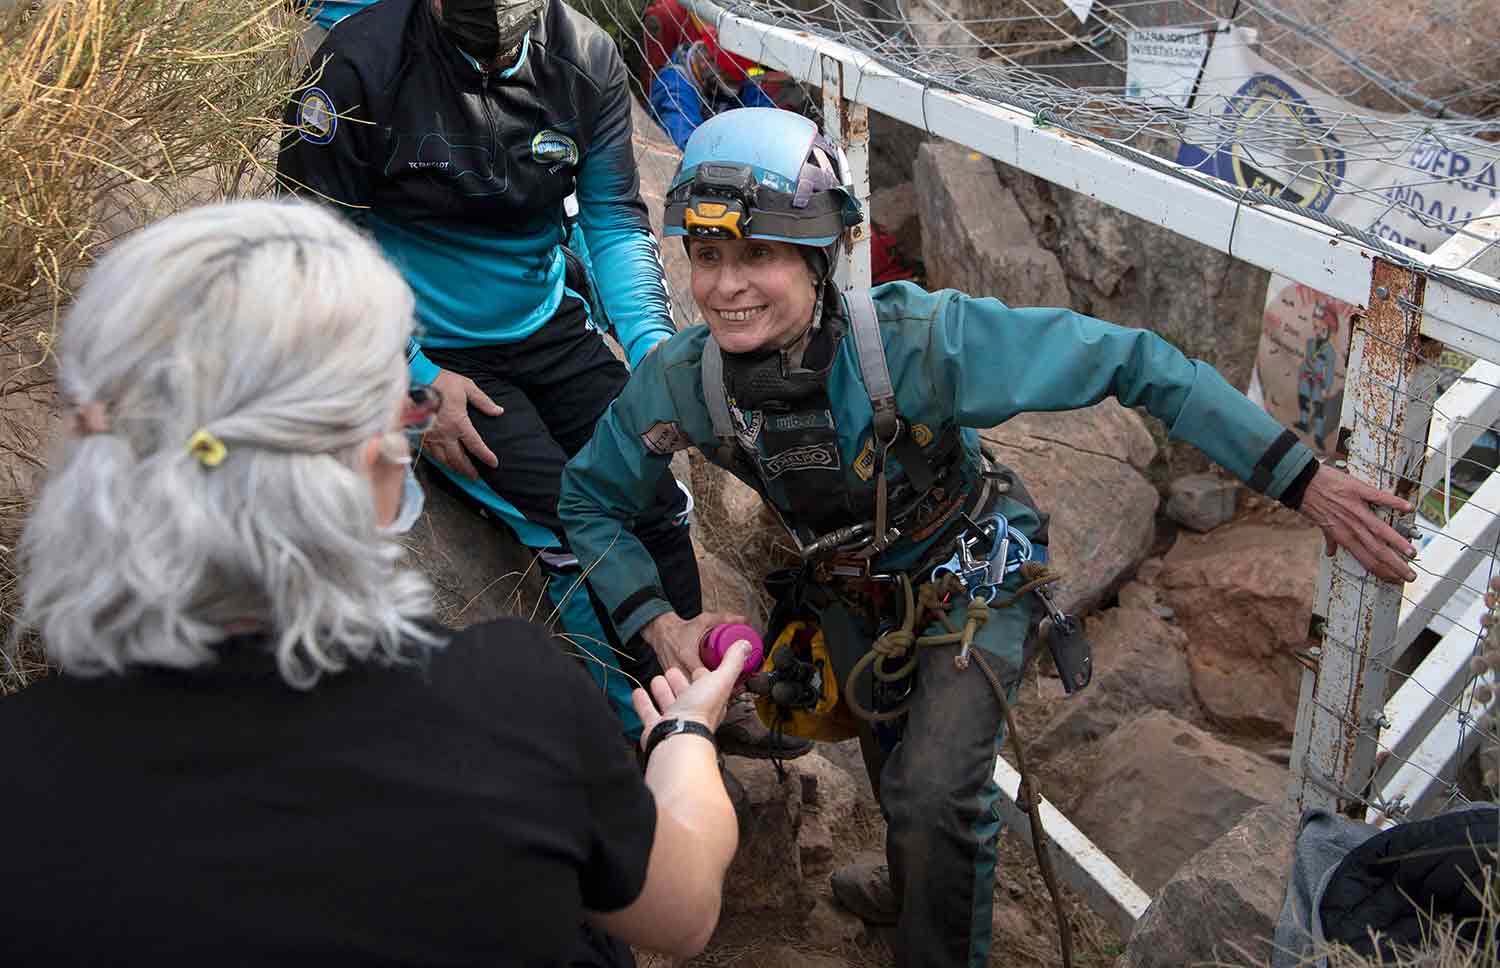 A woman smiles as she walks out of a rock-filled cave as another woman reaches out to assist her.